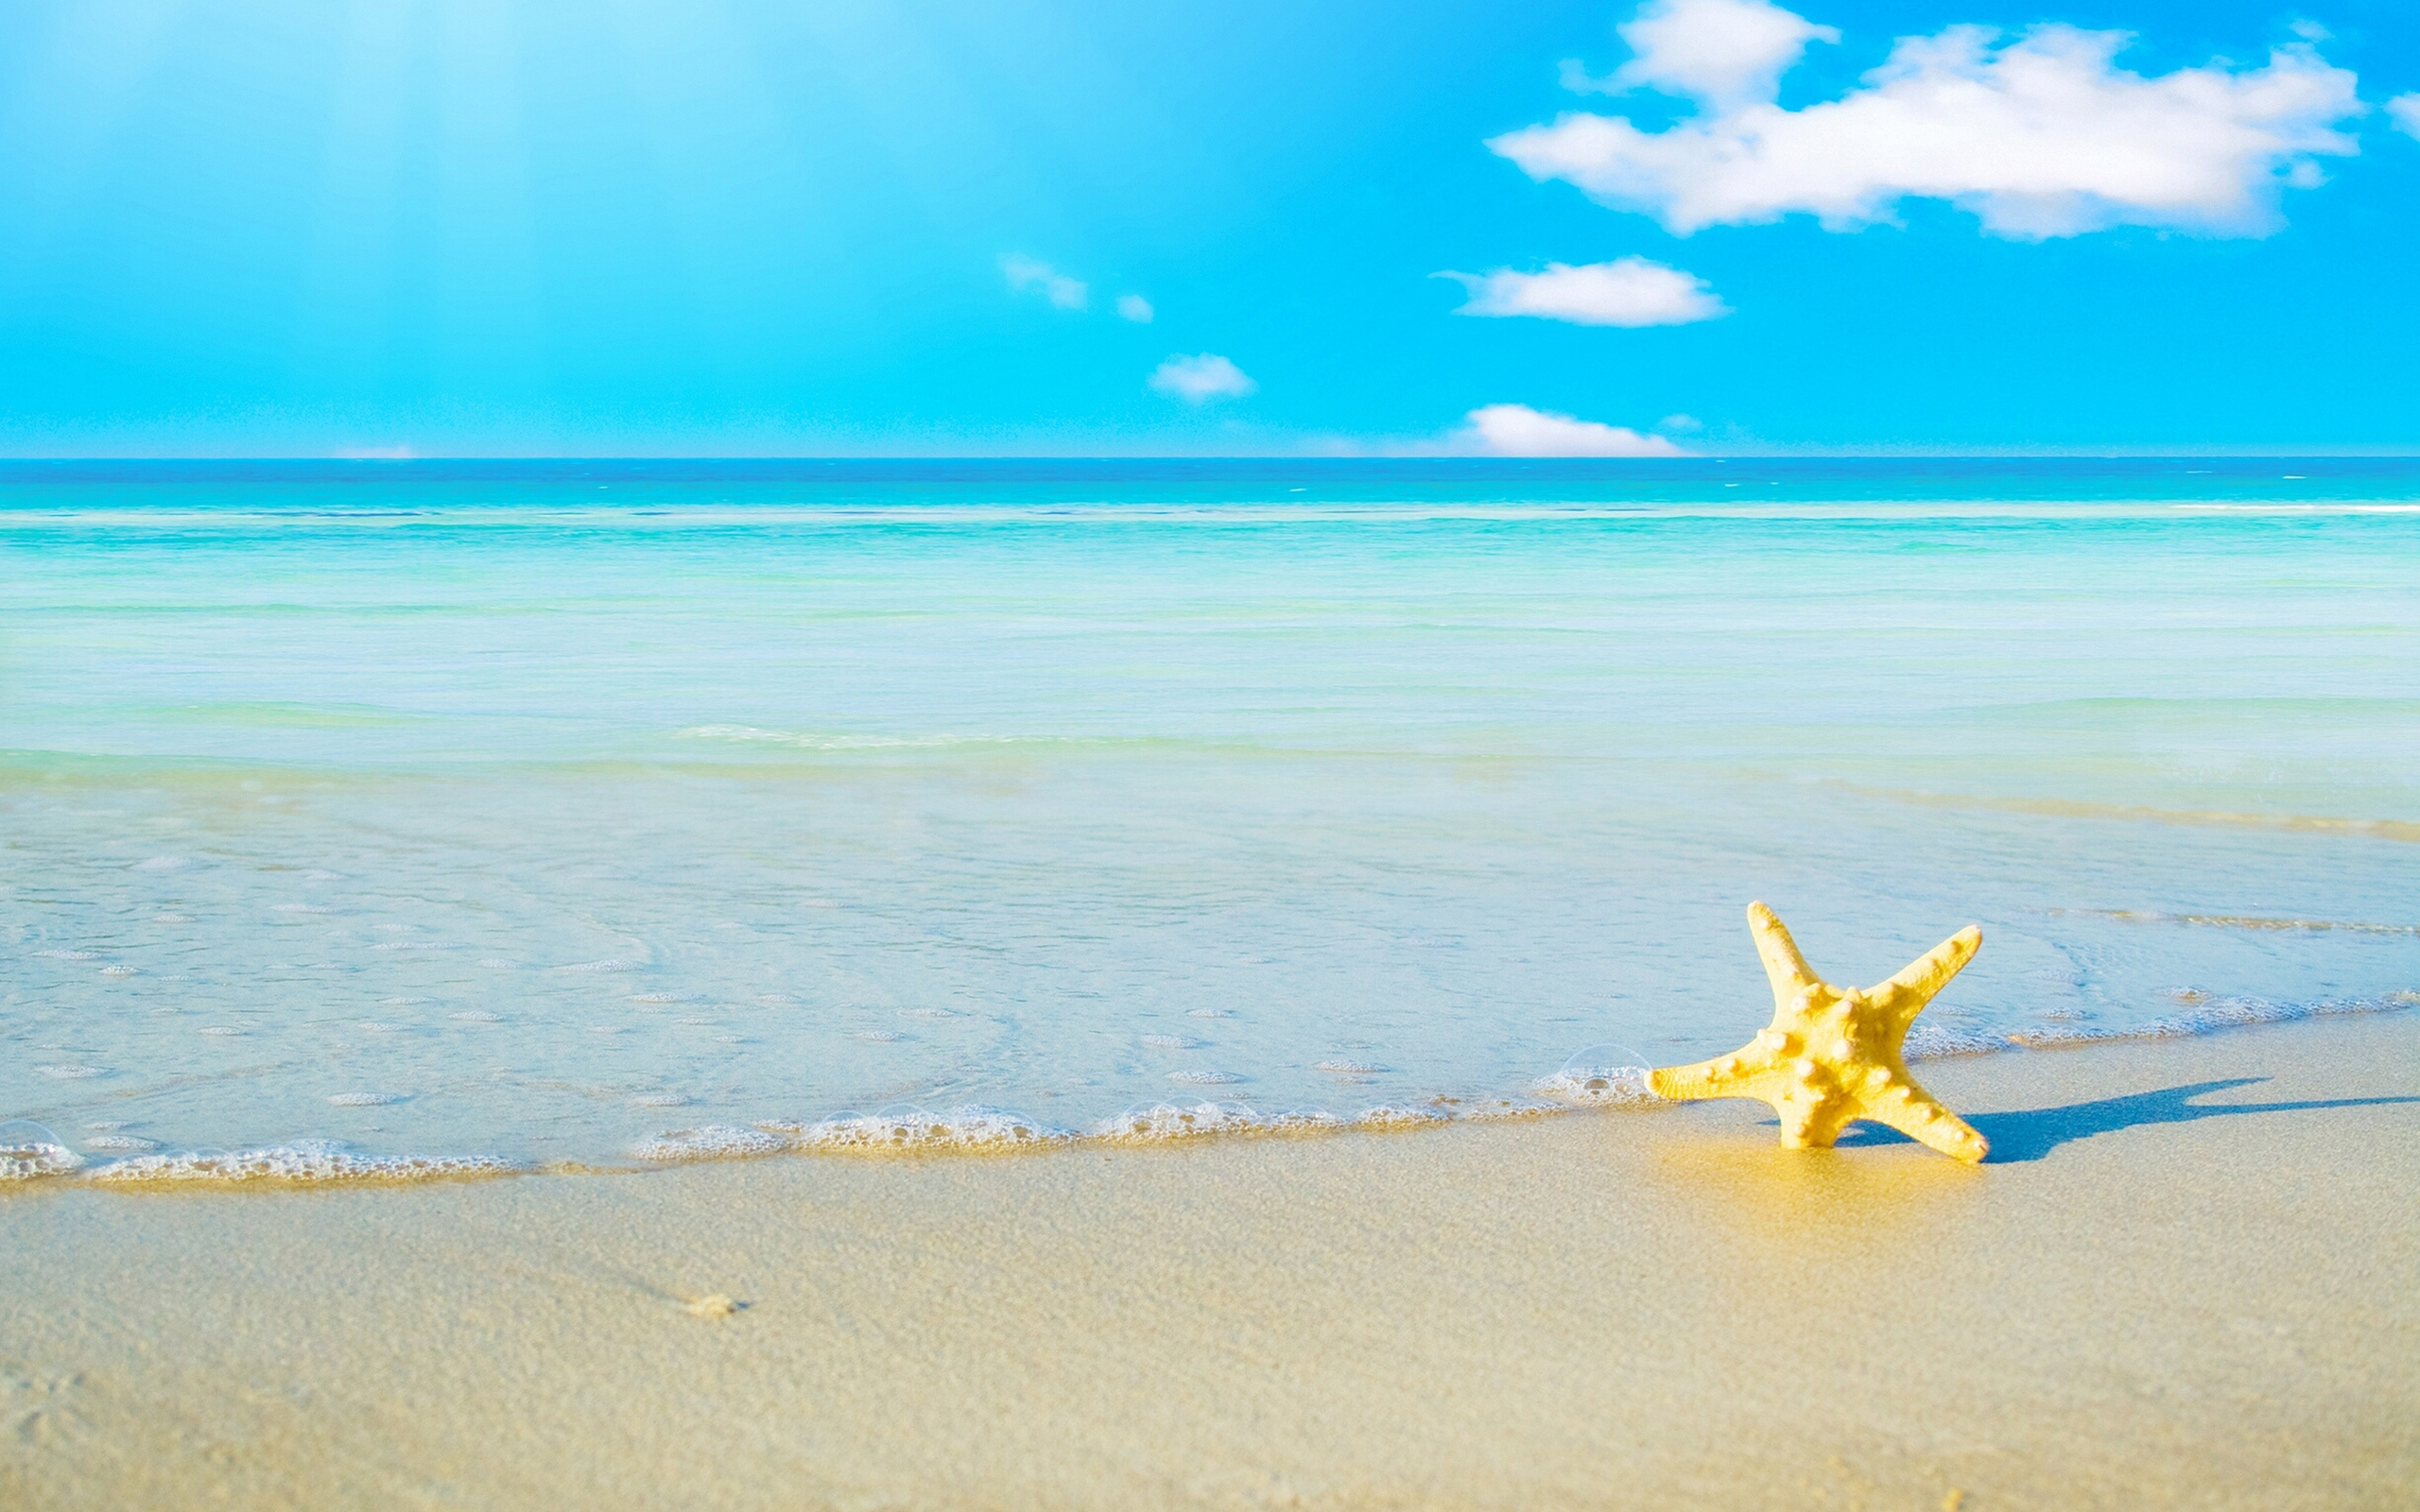 Free Beach Screensavers And Wallpapers Starfish On The Beach photos of 2560x1600